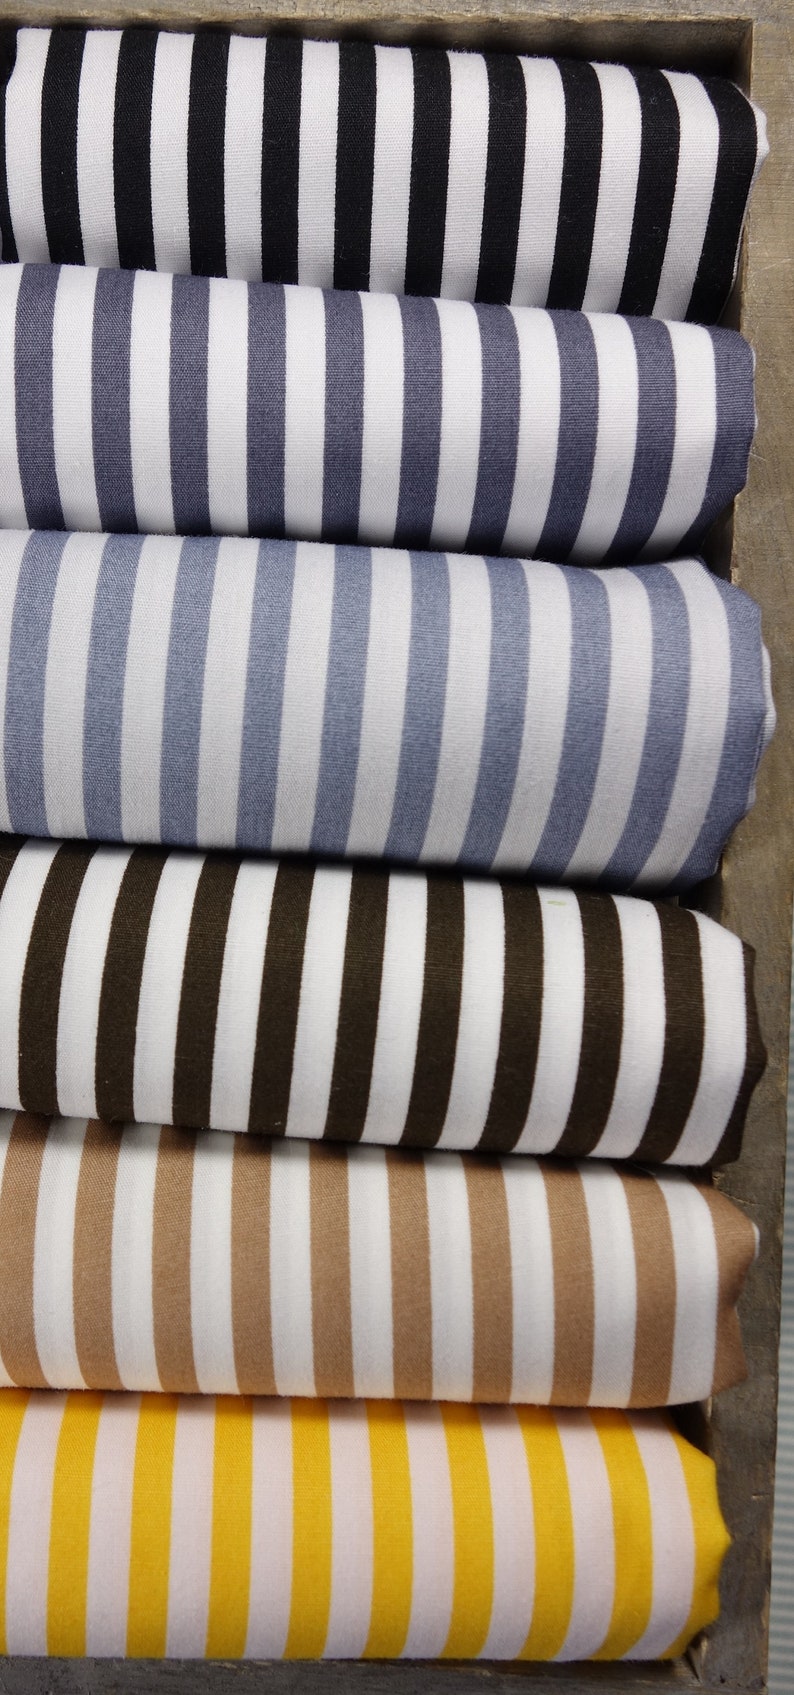 Cotton fabric striped stripes wide range of colors image 4